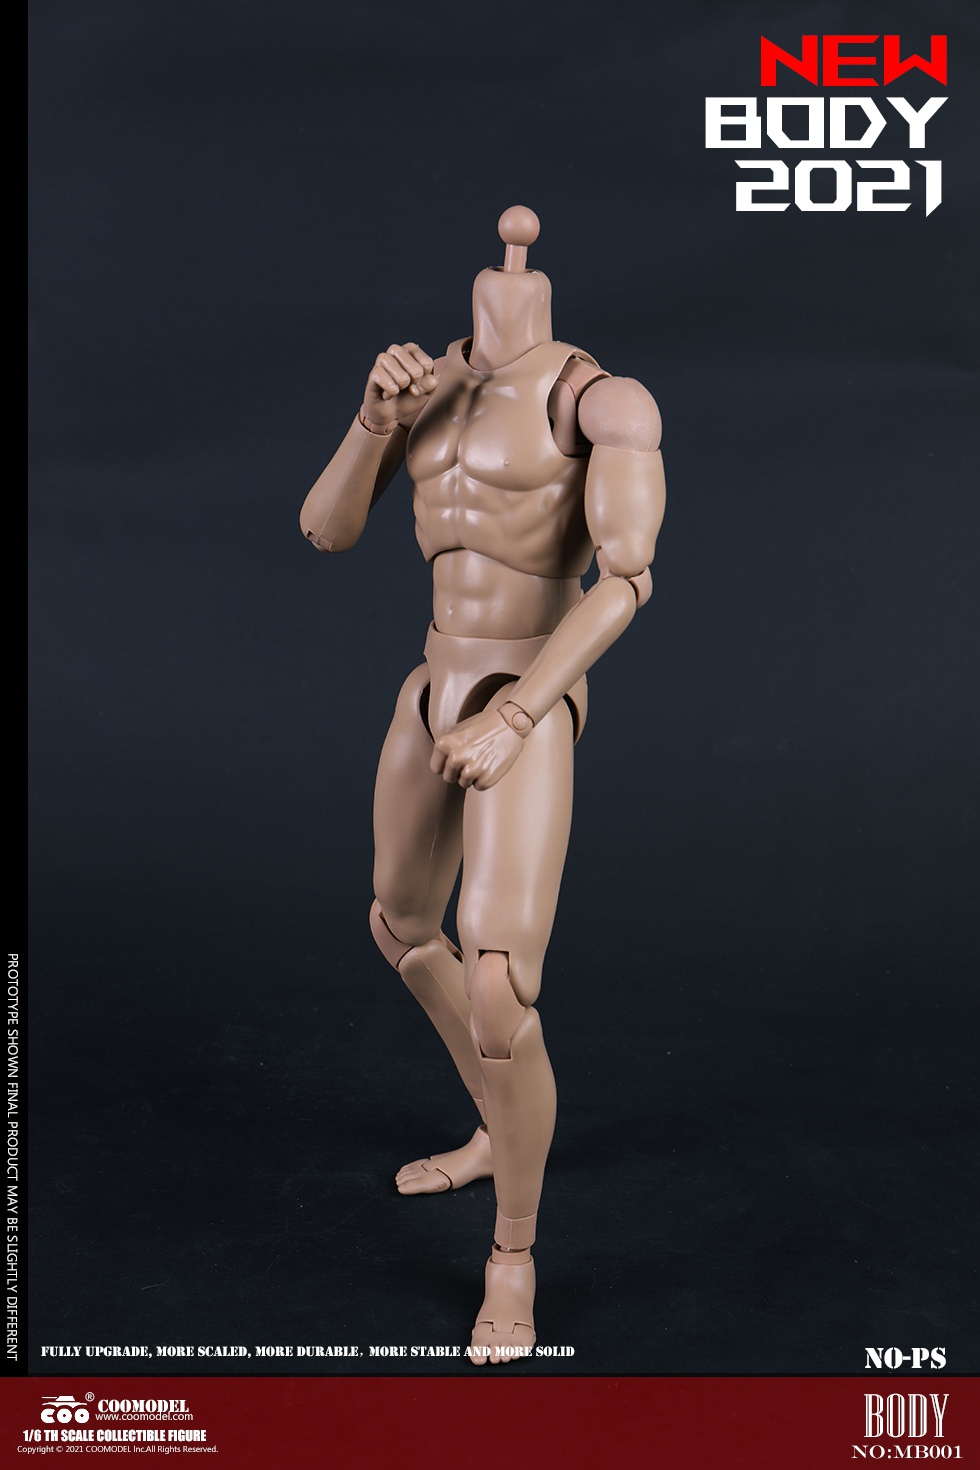 Coomodel - NEW PRODUCT: COOMODEL: 1/6 MB001 standard male body, MB002 tall male body, MB003 muscle male body, MB004 tall muscle body 18090011